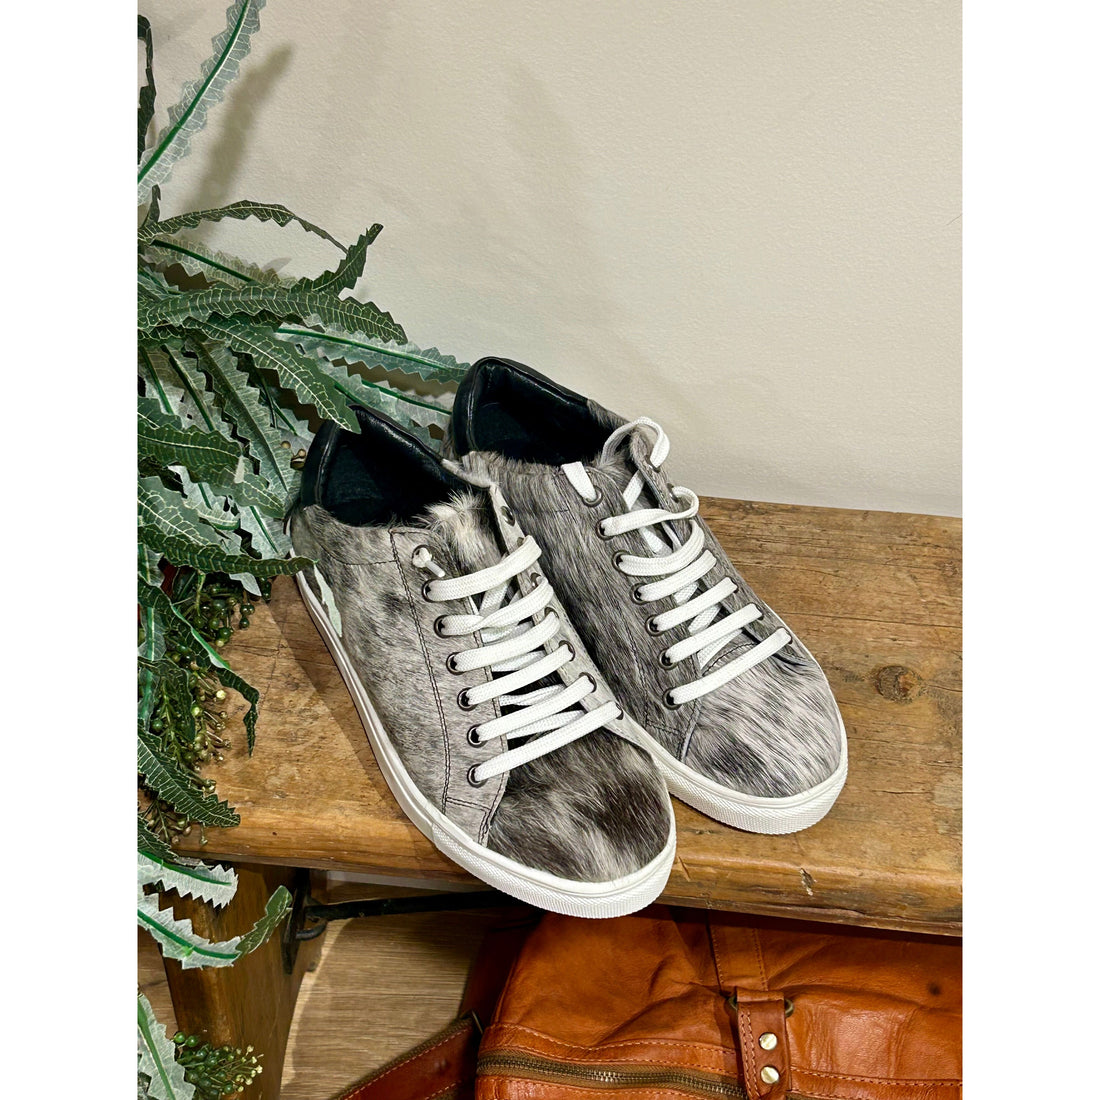 Black and White Cowhide Lace-Up Shoes Size 39 